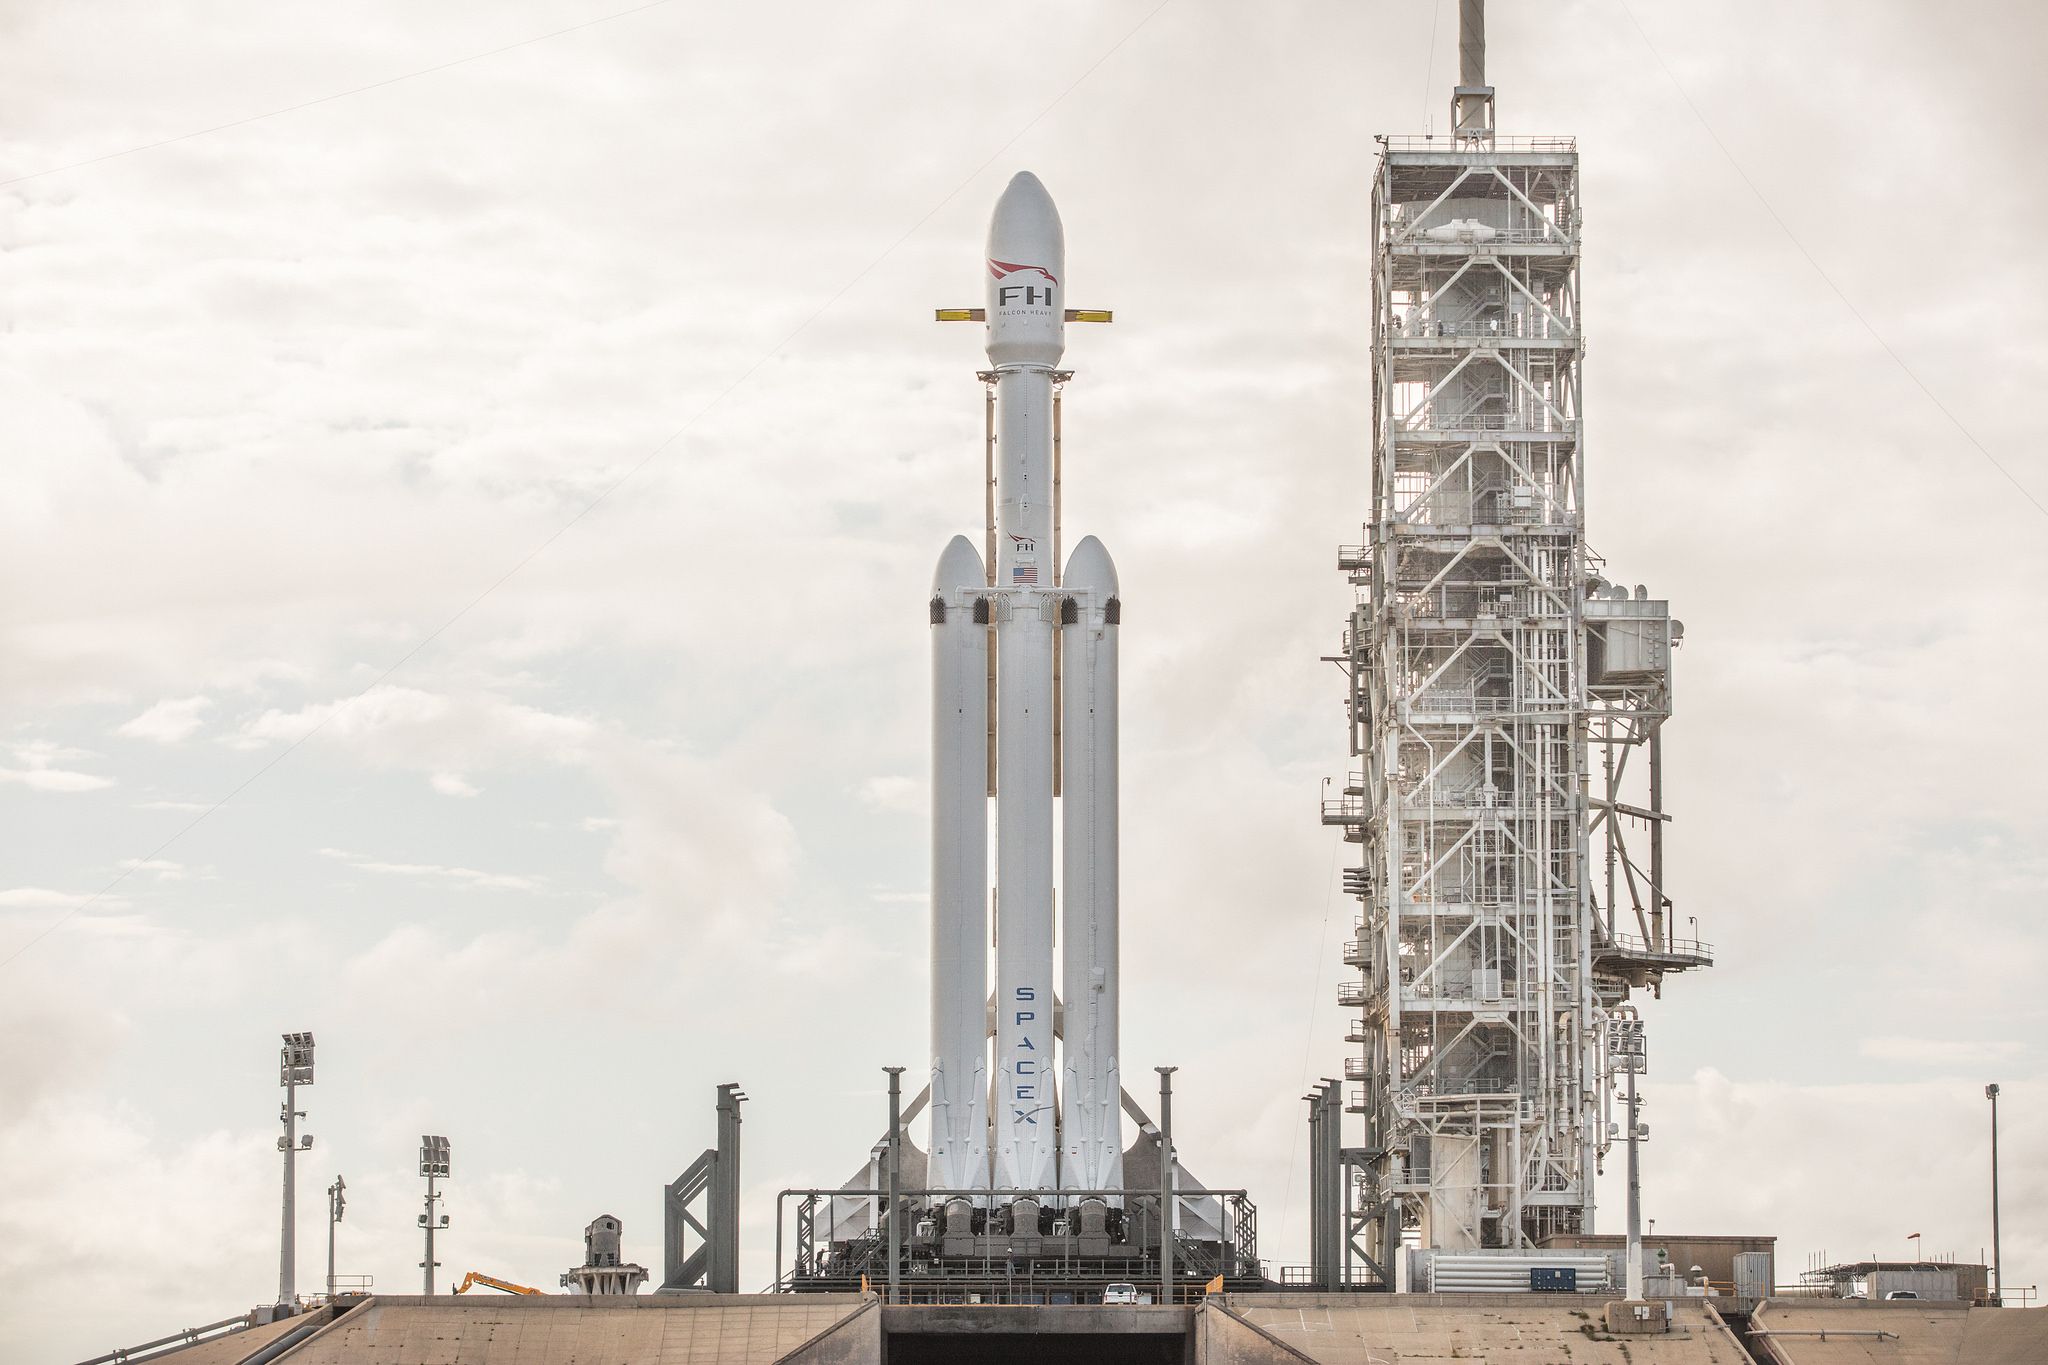 SpaceX Falcon Heavy See 'World's Most Powerful Rocket' That Will